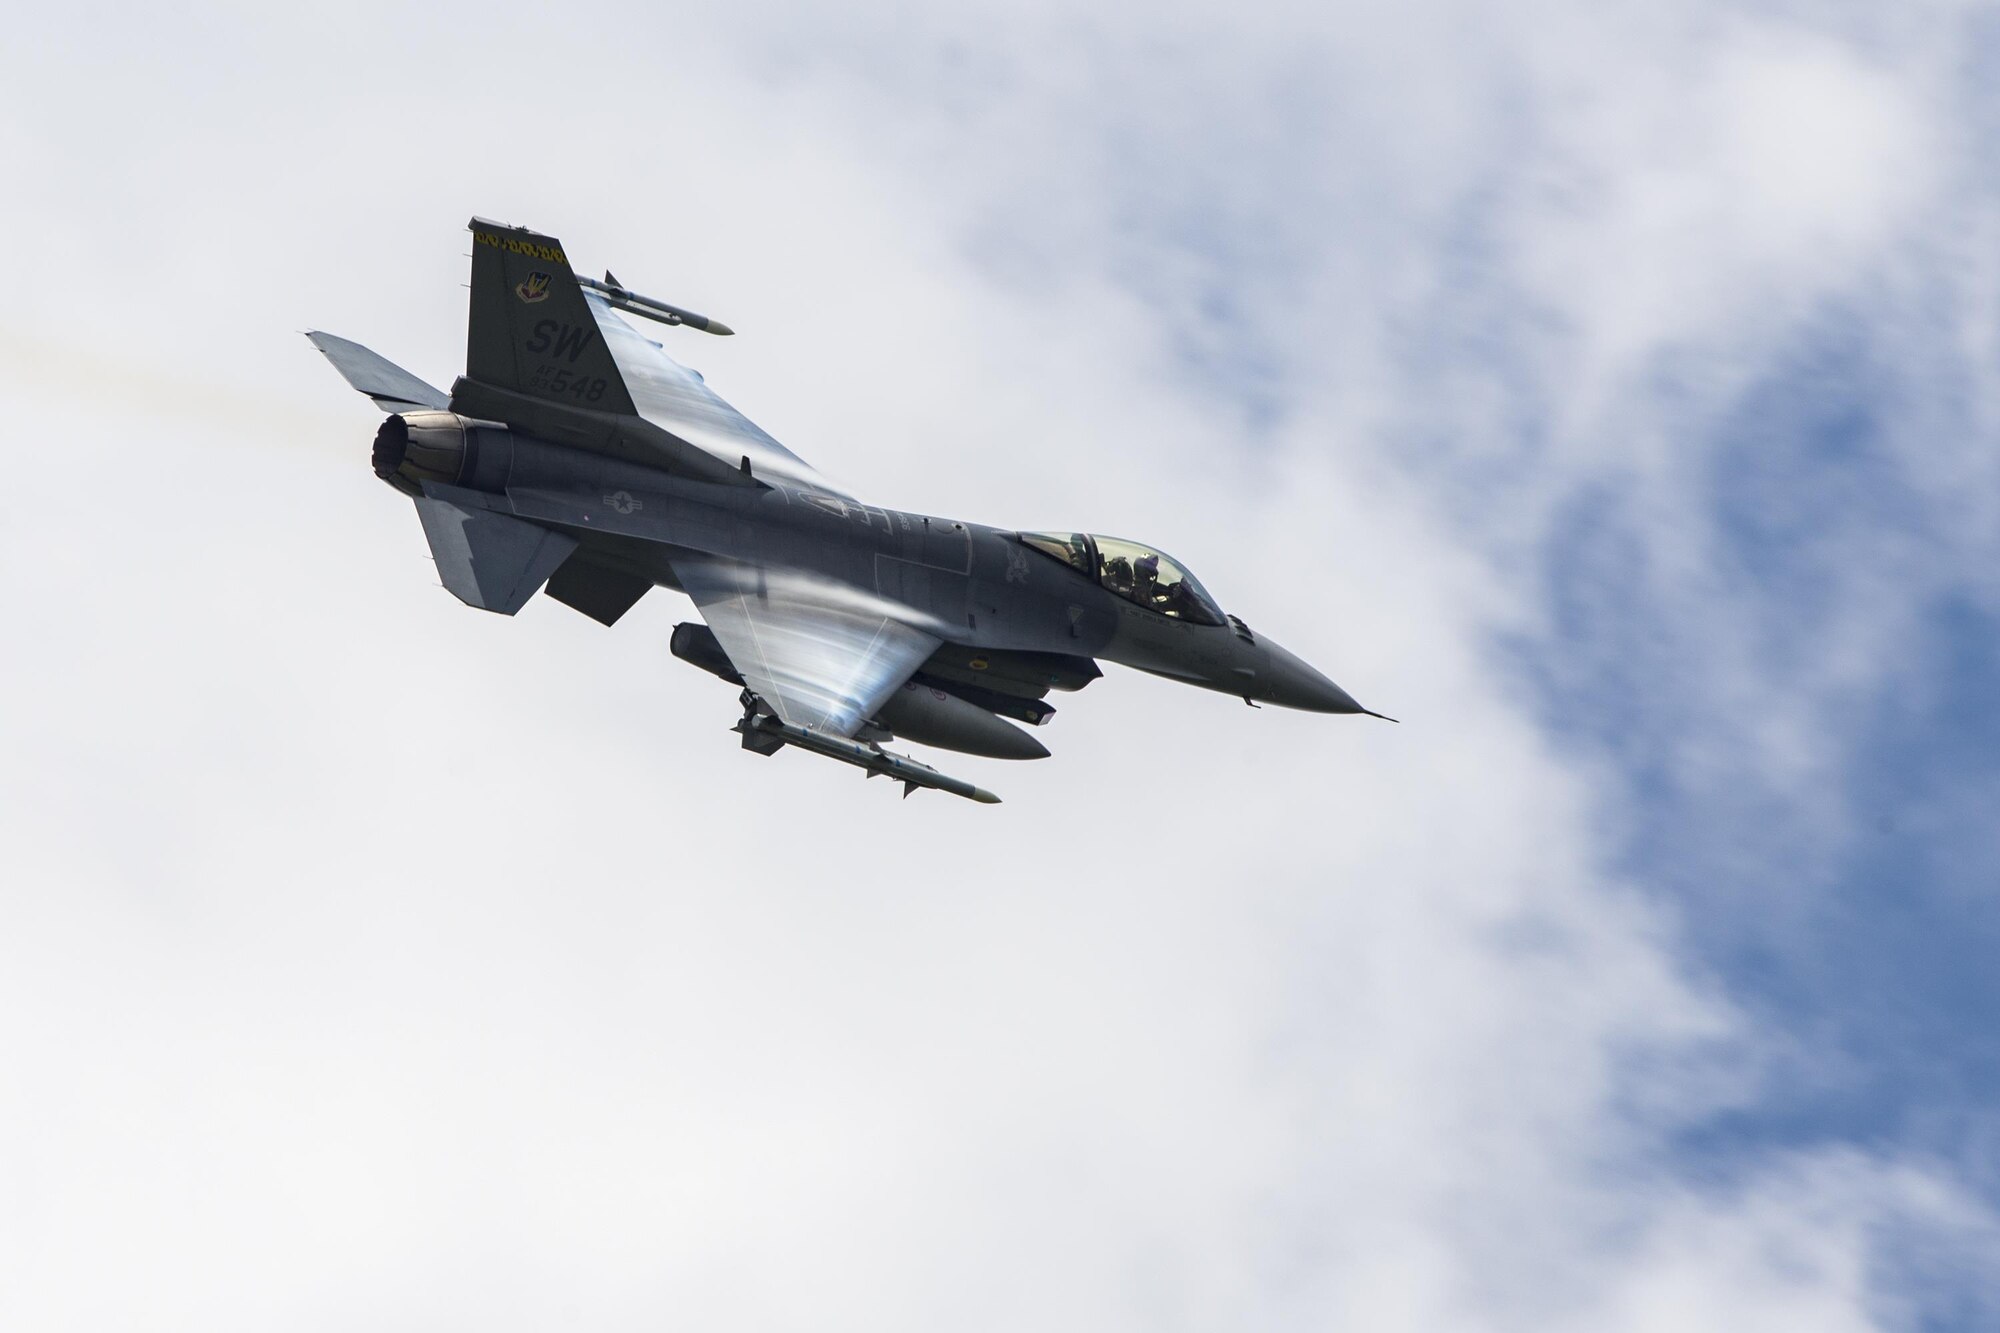 An F-16 Fighting Falcon flies over Grand Bay Bombing and Gunnery Range at Moody Air Force Base, Ga., May 20, 2016. Multiple U.S. Air Force aircraft within Air Combat Command conducted joint aerial training showcasing the aircraft’s tactical air and ground maneuvers, as well as its weapons capabilities. (U.S. Air Force photo by Airman Daniel Snider/Released)